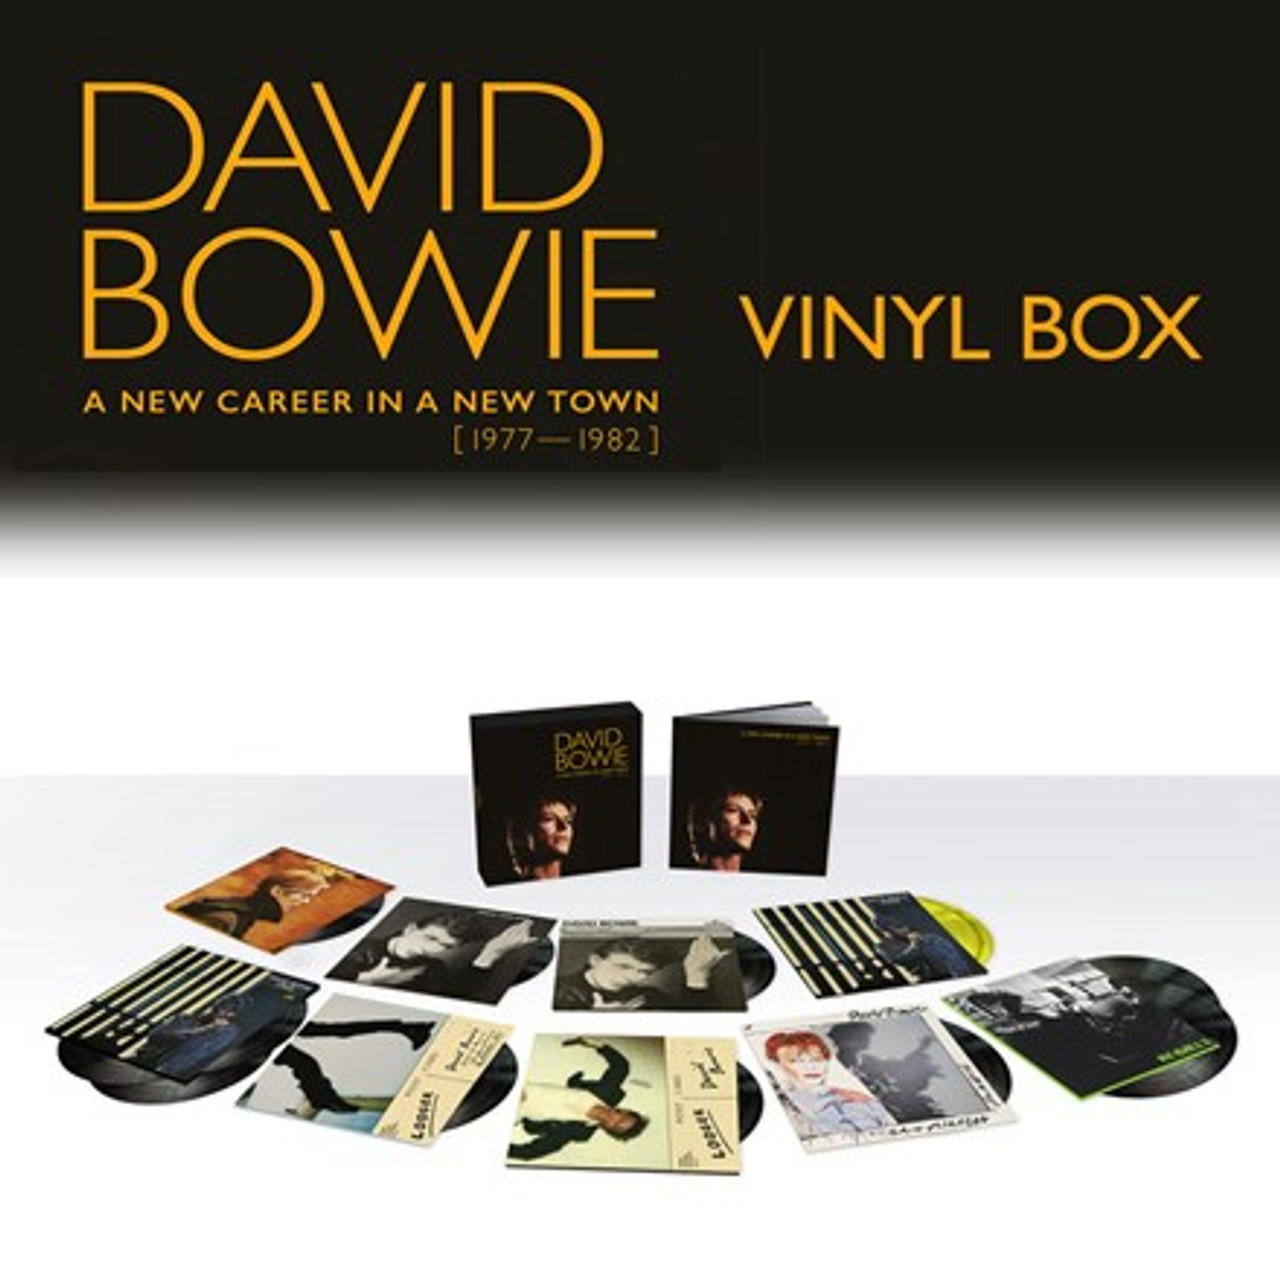 David Bowie - A New Career In A New Town: 1977-1982 (180g Vinyl 13LP Box  Set)